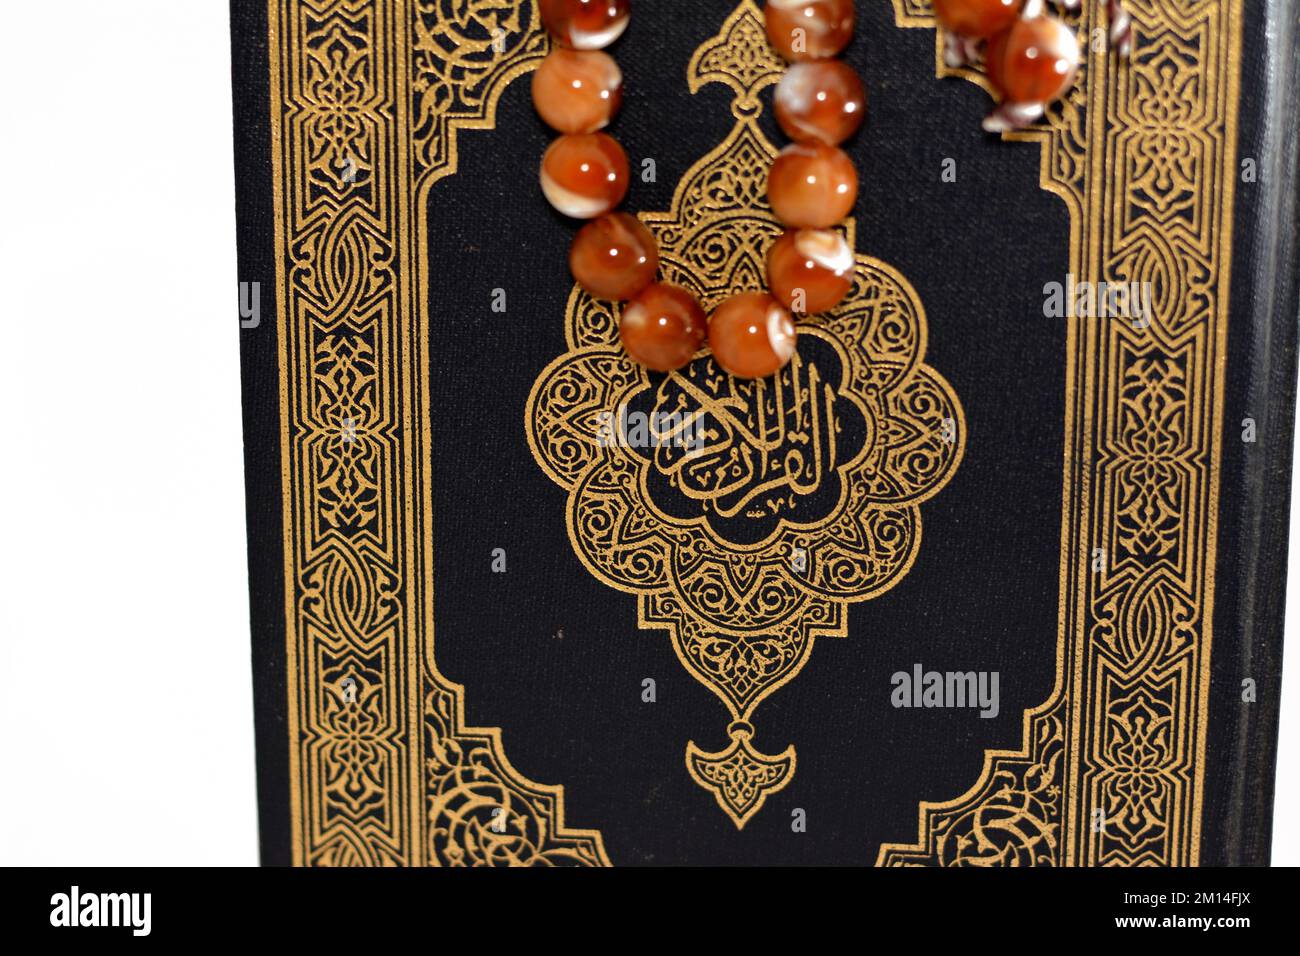 The holy Quran, Qur'an or Koran (the recitation) is the central religious text of Islam, believed by Muslims to be a revelation from God (Allah), isol Stock Photo